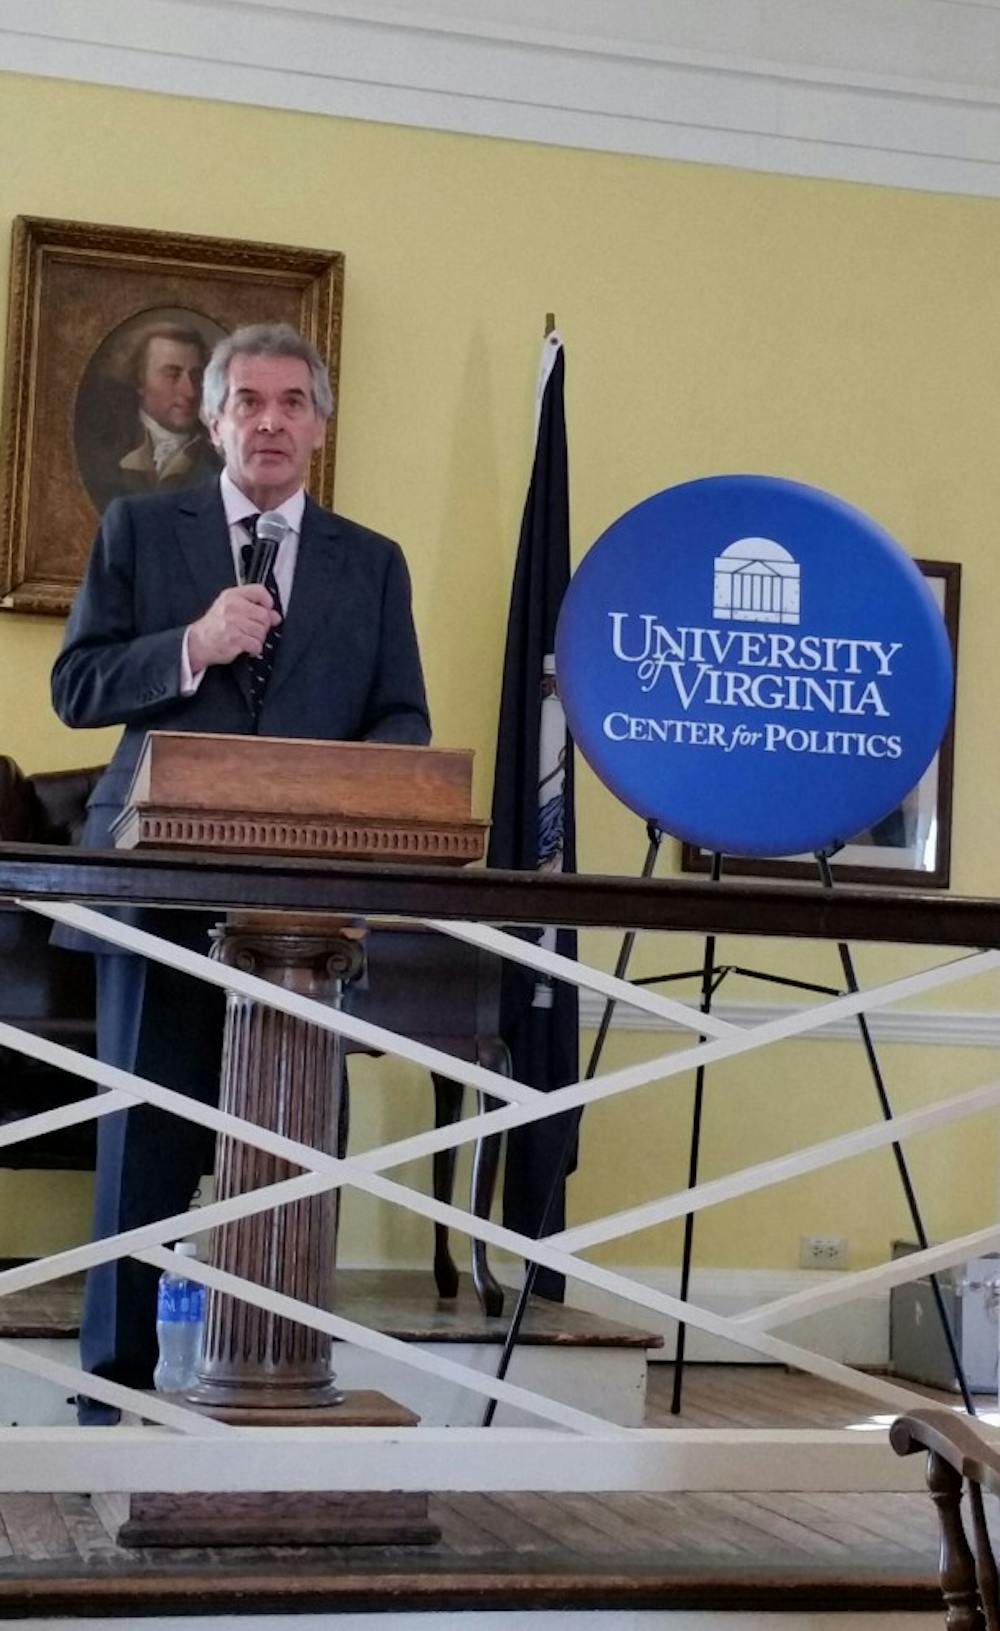 <p>Sir Peter Westmacott (above) spoke at a public event at Hotel C, put on by the University Center for Politics and International Residential College. He covered a swath of topics, including economic policies and counterterrorism efforts.</p>